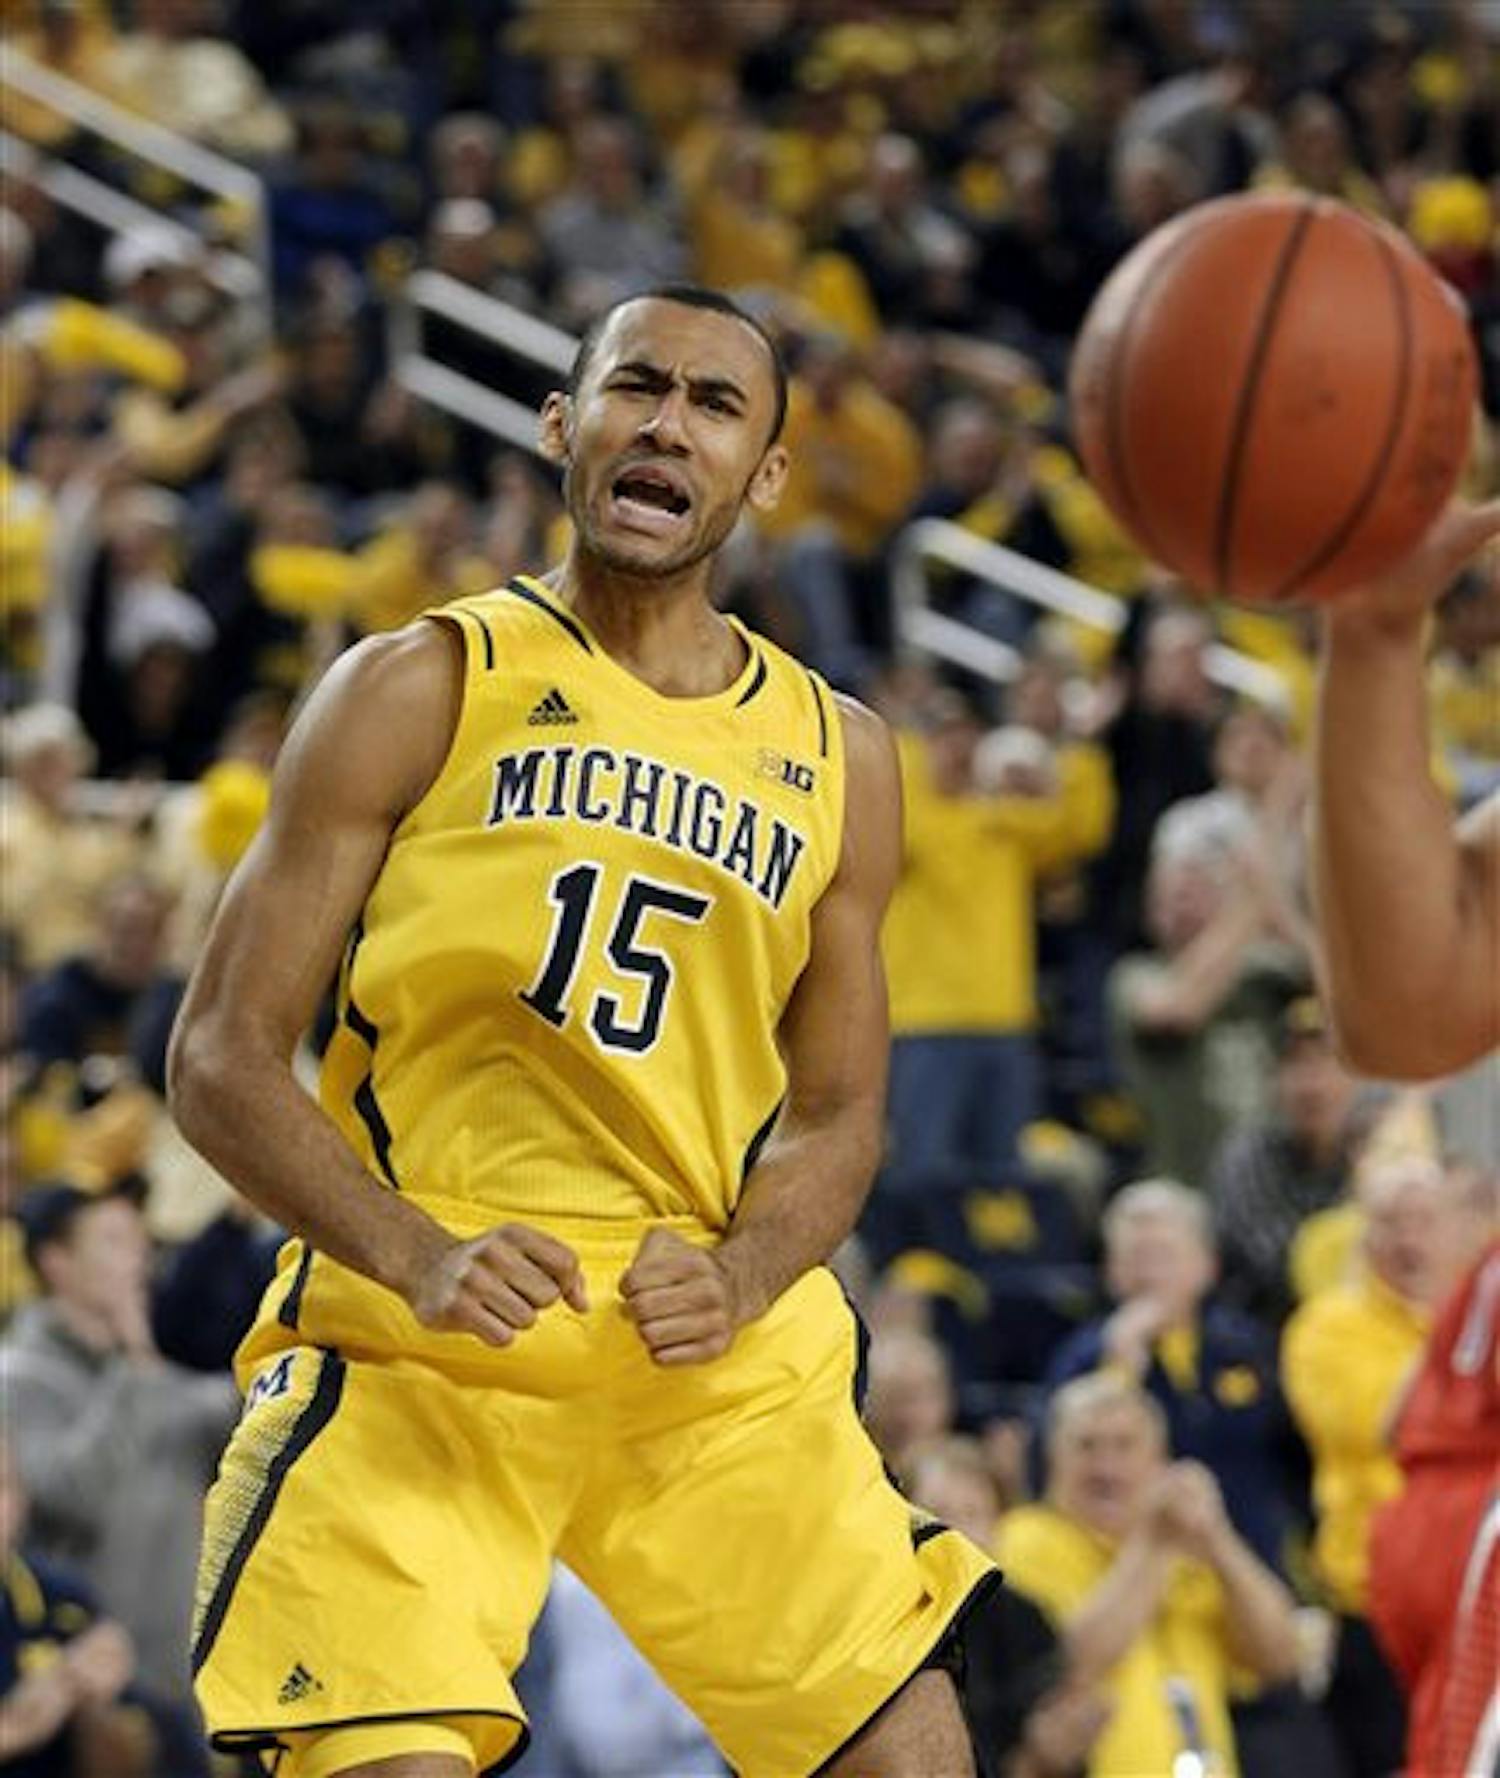 Michigan forward Jon Horford reacts after making a basket during a game against Arizona in Ann Arbor, Mich., on Dec. 14.